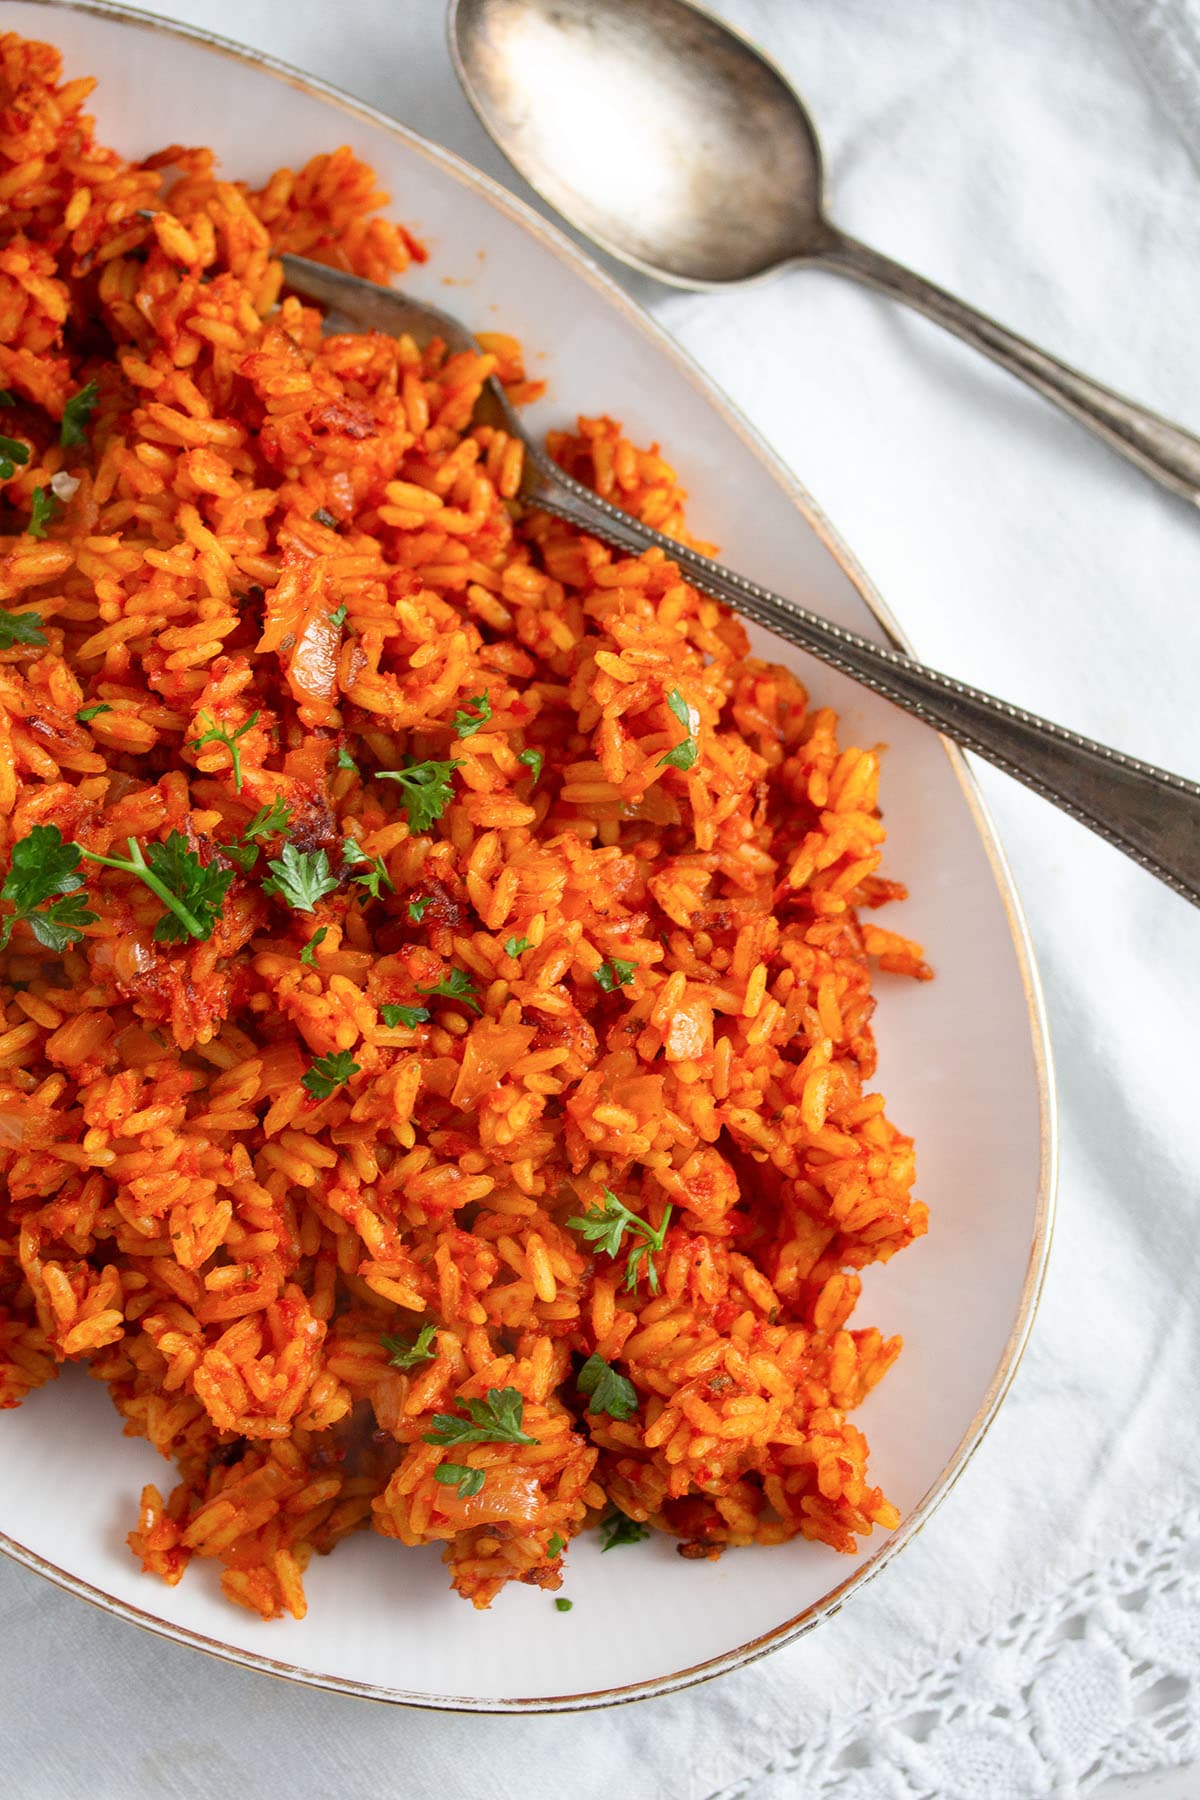 bright orange jollof rice nigerian style on a platter with fork and spoon.